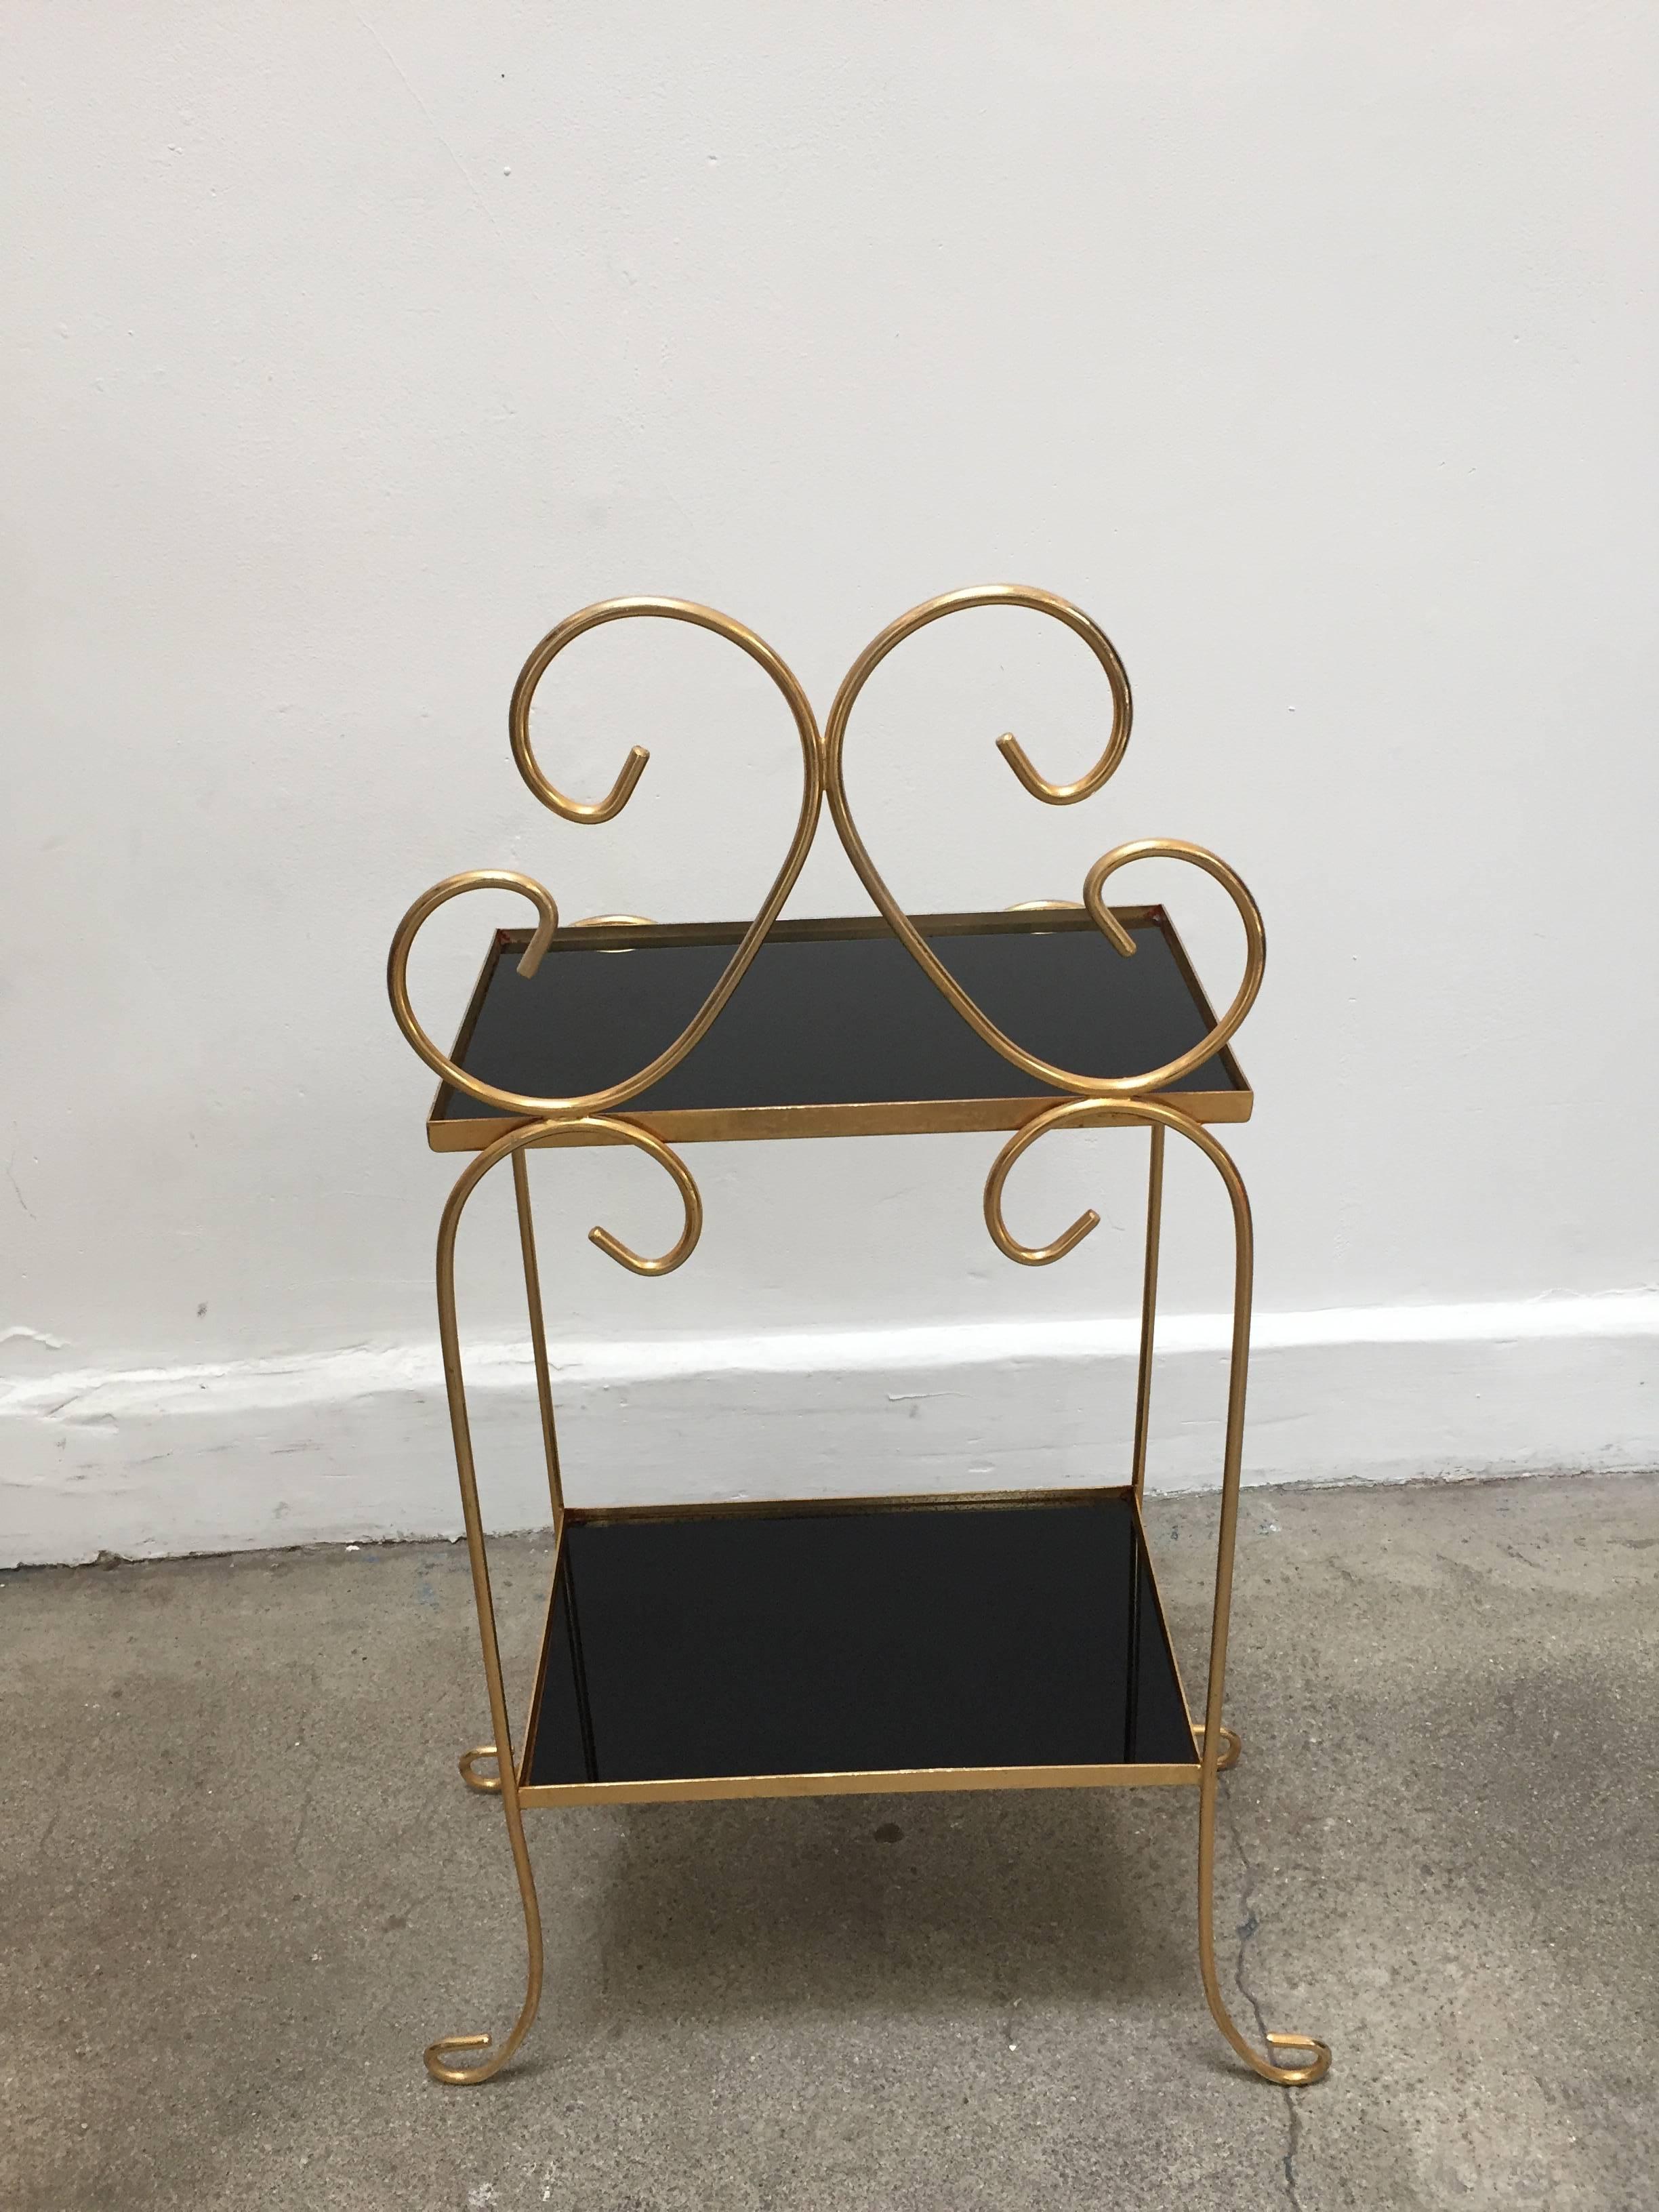 20th Century French Gilt Metal Side Table with Two-Tier Black Glass Shelves